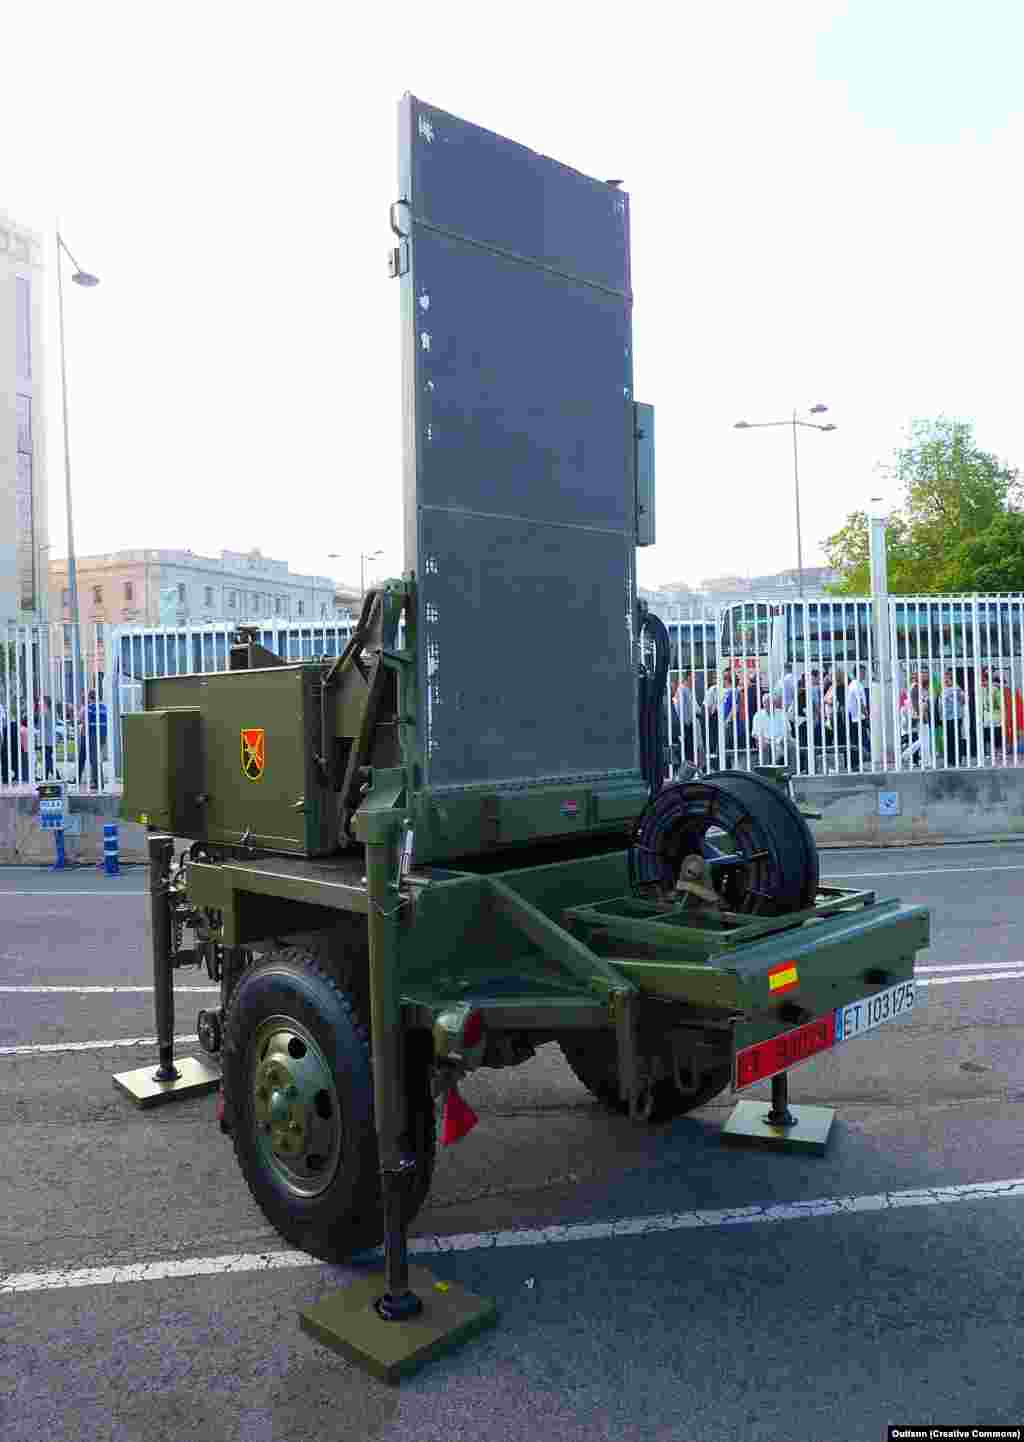 Ten AN/TPQ-36 counterartillery radars &nbsp; This &ldquo;weapon-locating radar&rdquo; is used to spot incoming artillery and tracks a shell&rsquo;s trajectory to calculate where the enemy projectile was fired from. &nbsp;